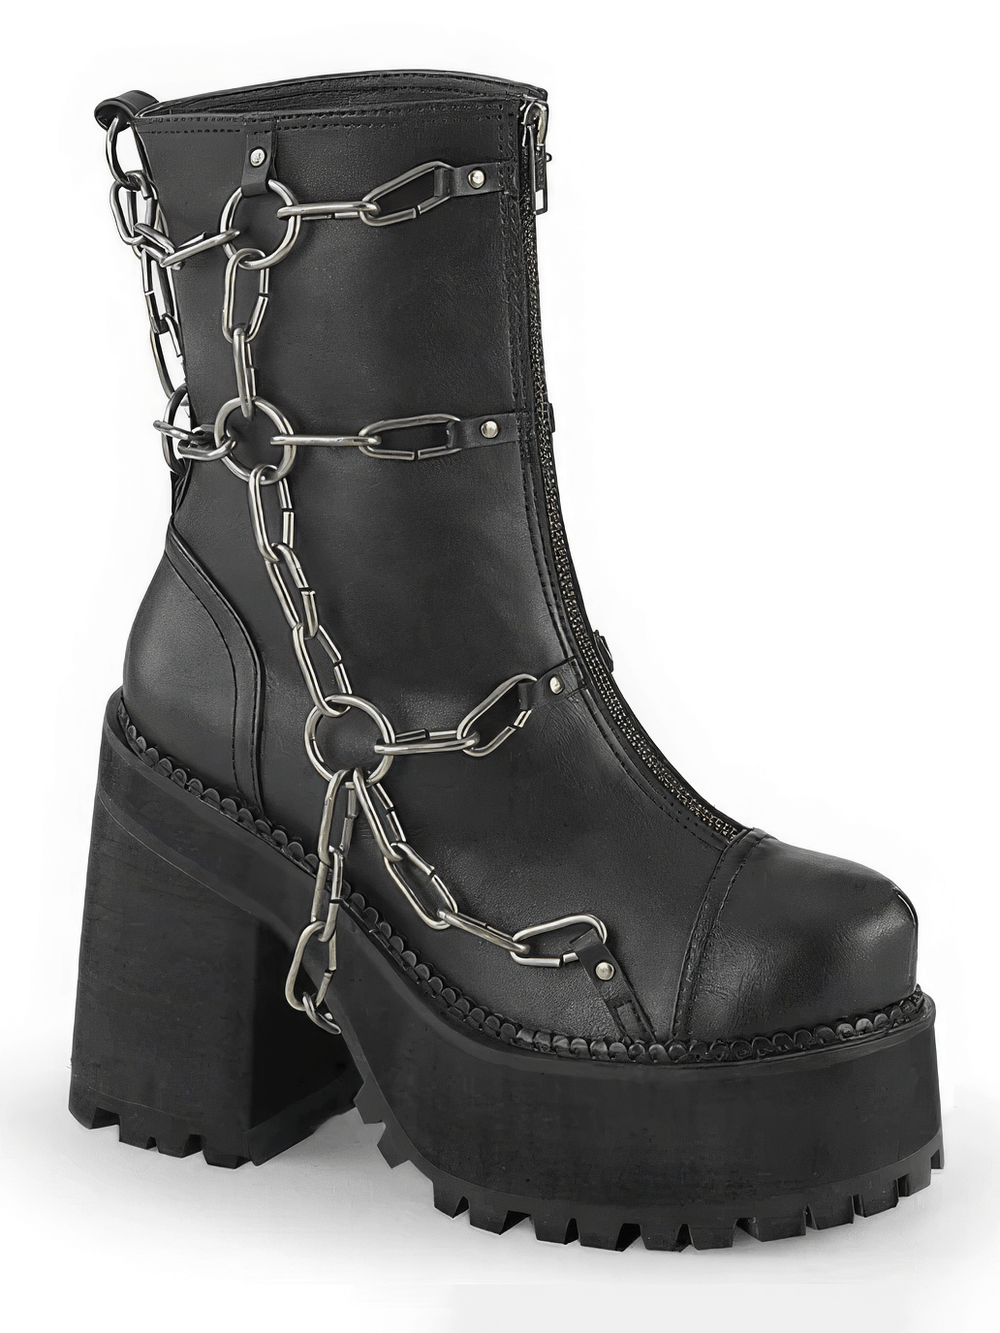 DEMONIA Black Ankle Boots with Metal Chain Details